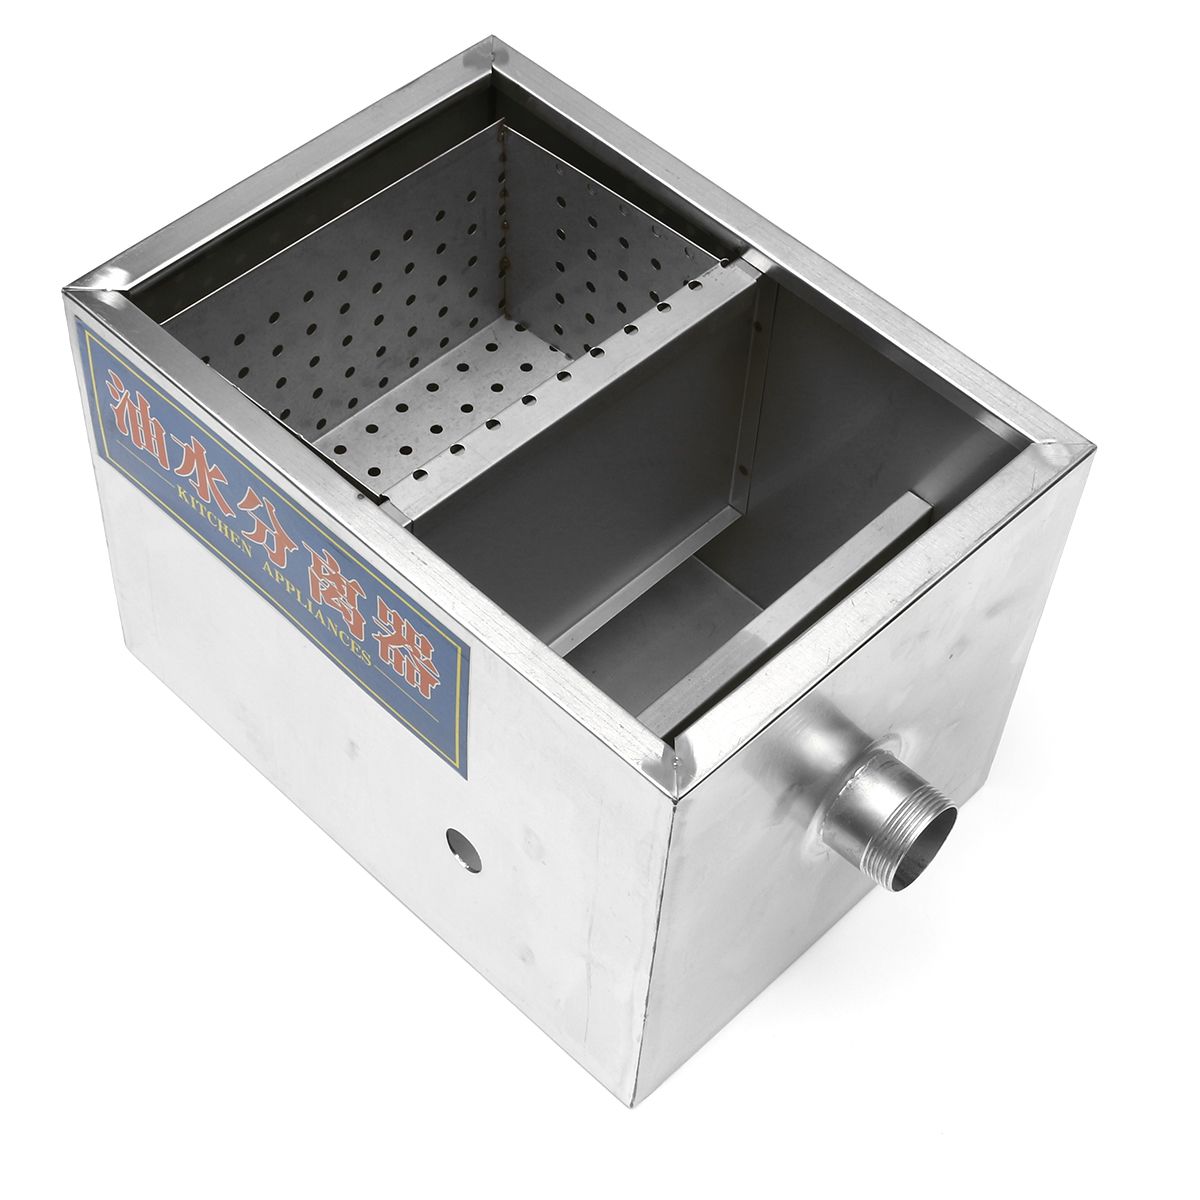 8LB-5GPM-Gallons-Per-Minute-Grease-Trap-Interceptor-Stainless-Steel-35x-25x25cm-1371408